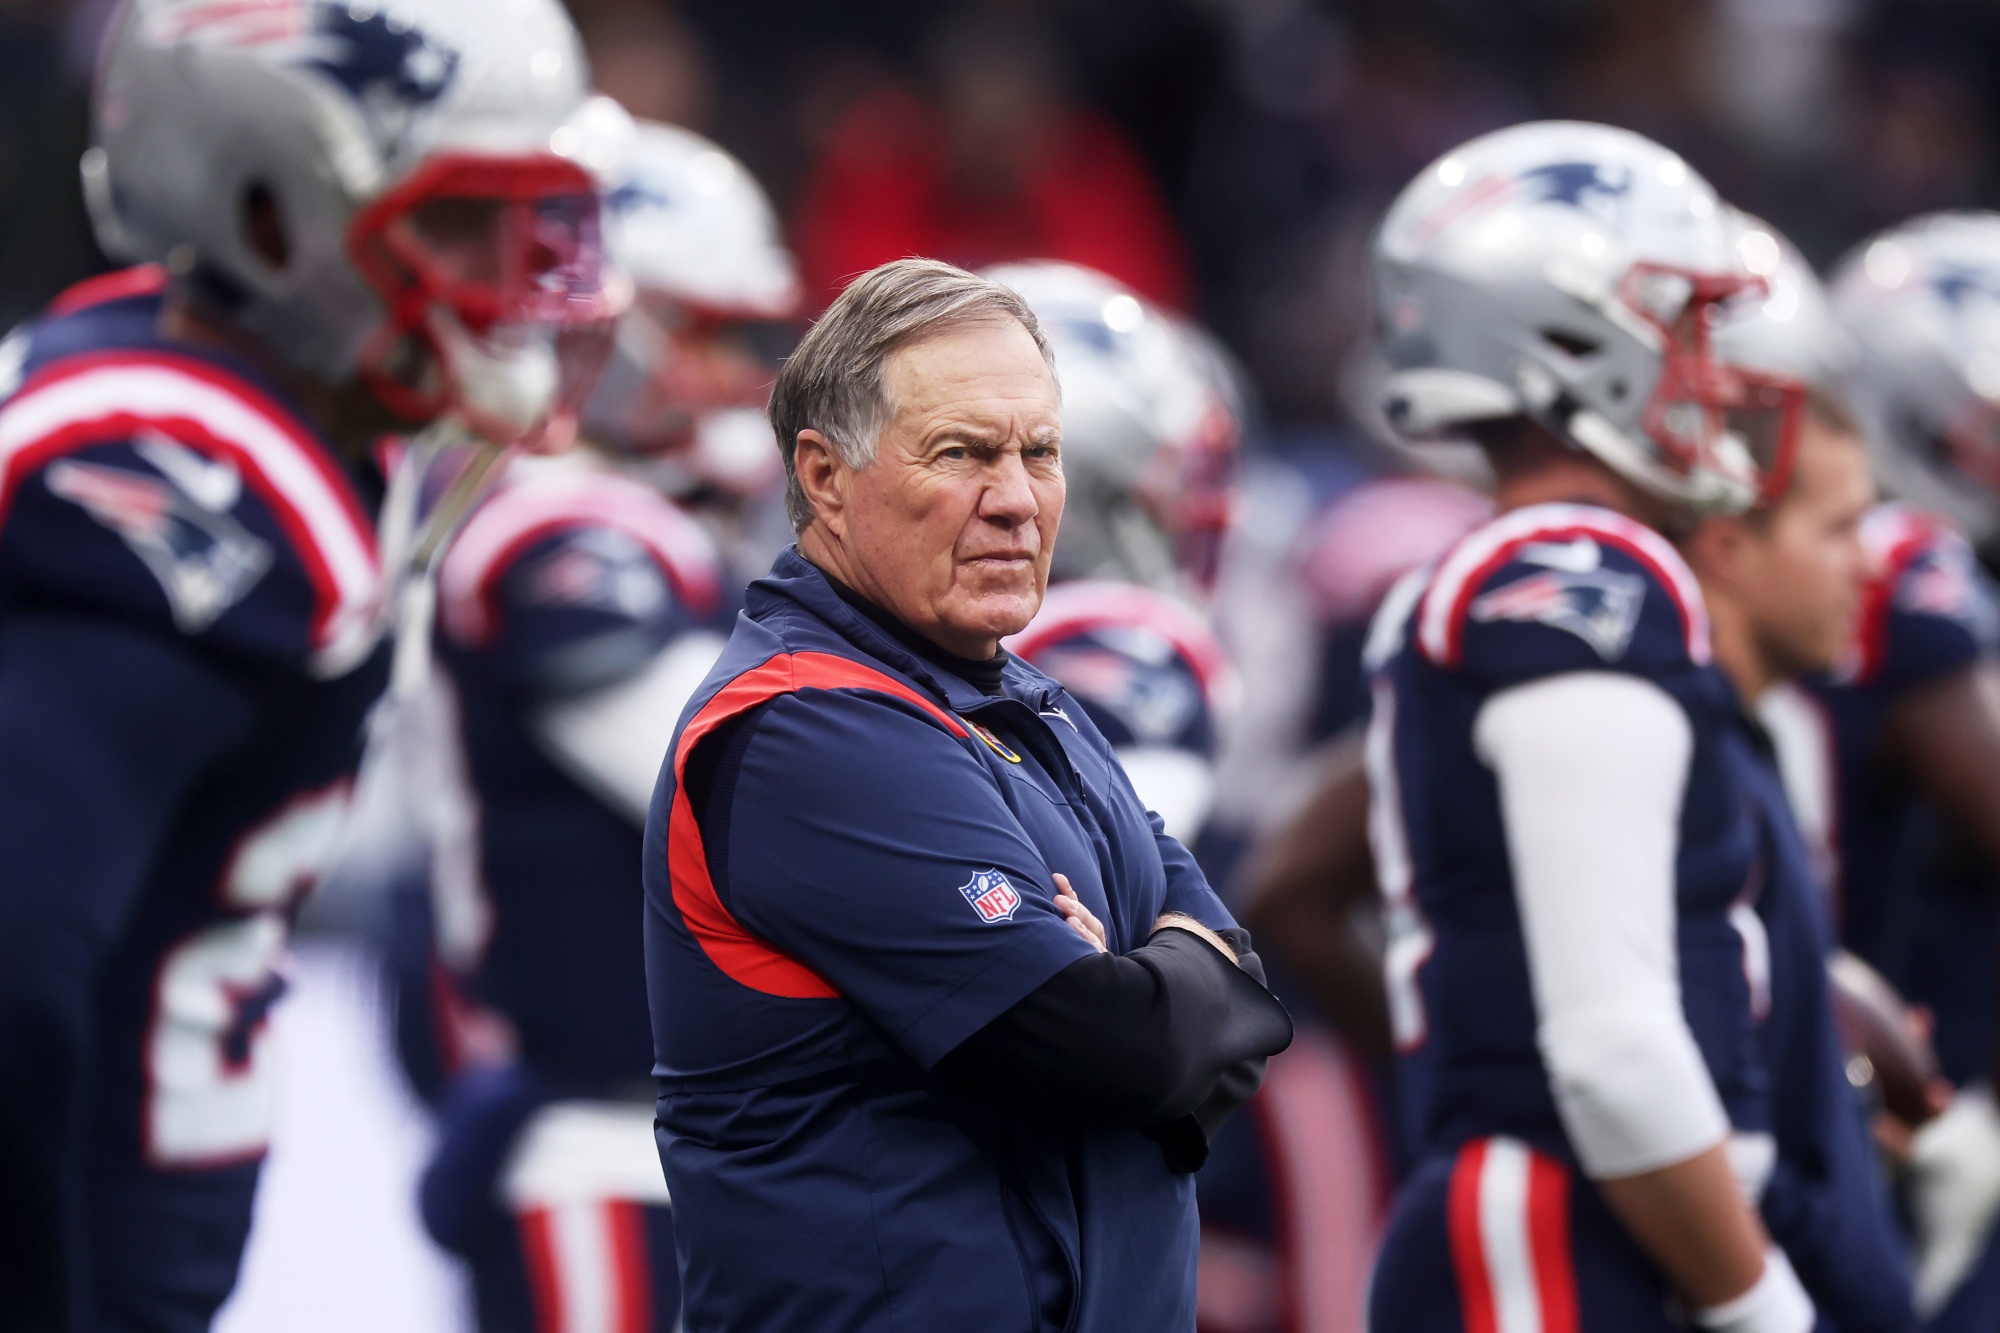 Bill Belichick Earned Over $200 Million With New England Patriots Before Exit - Bloomberg